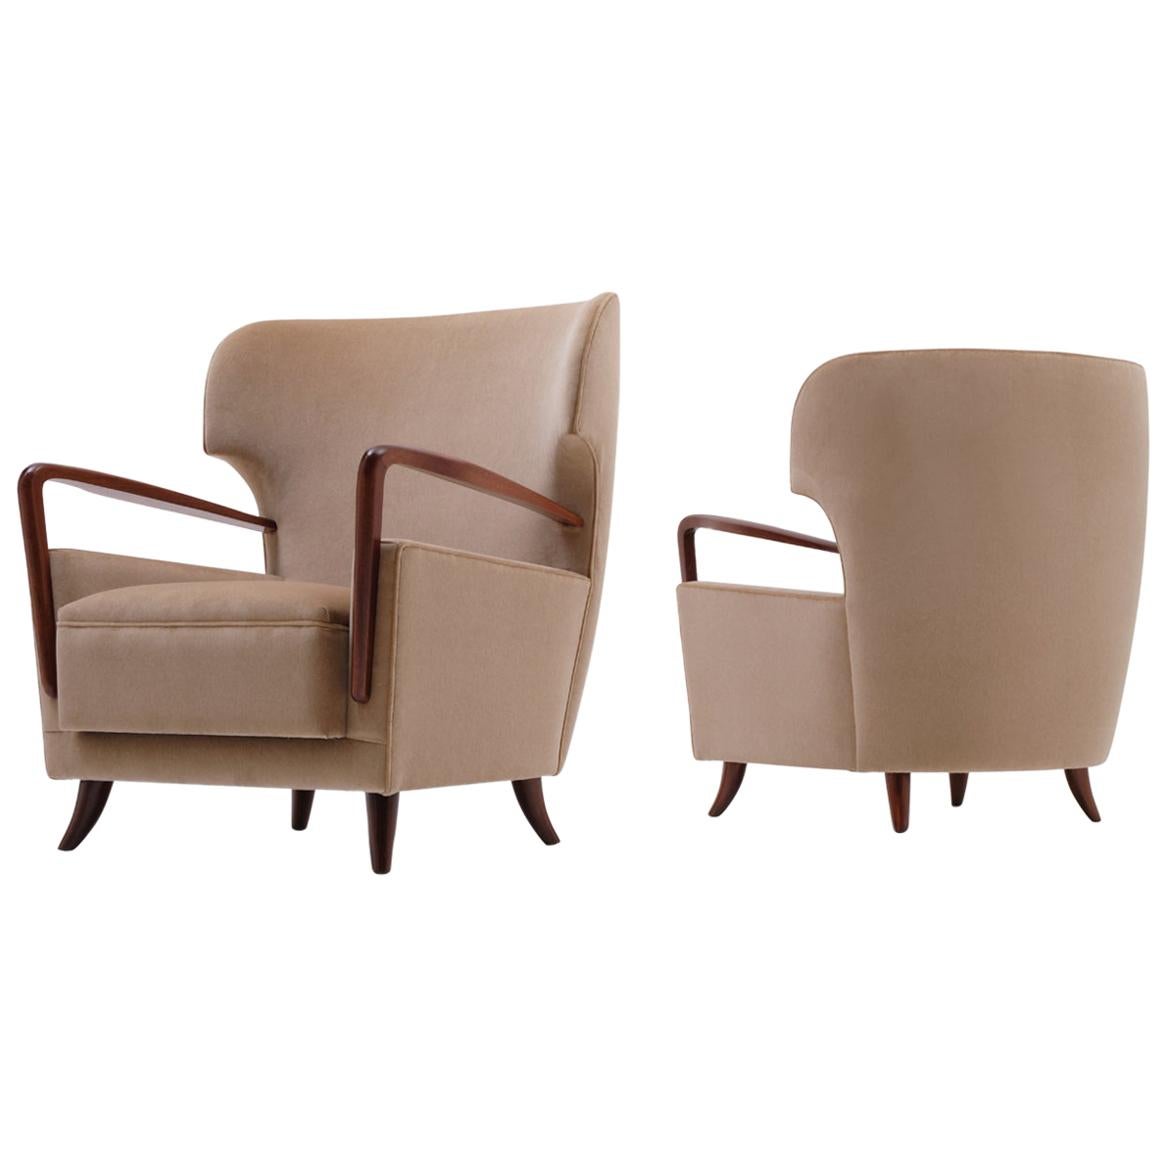 Melchiorre Bega Wingback Armchairs, Italy, 1950s